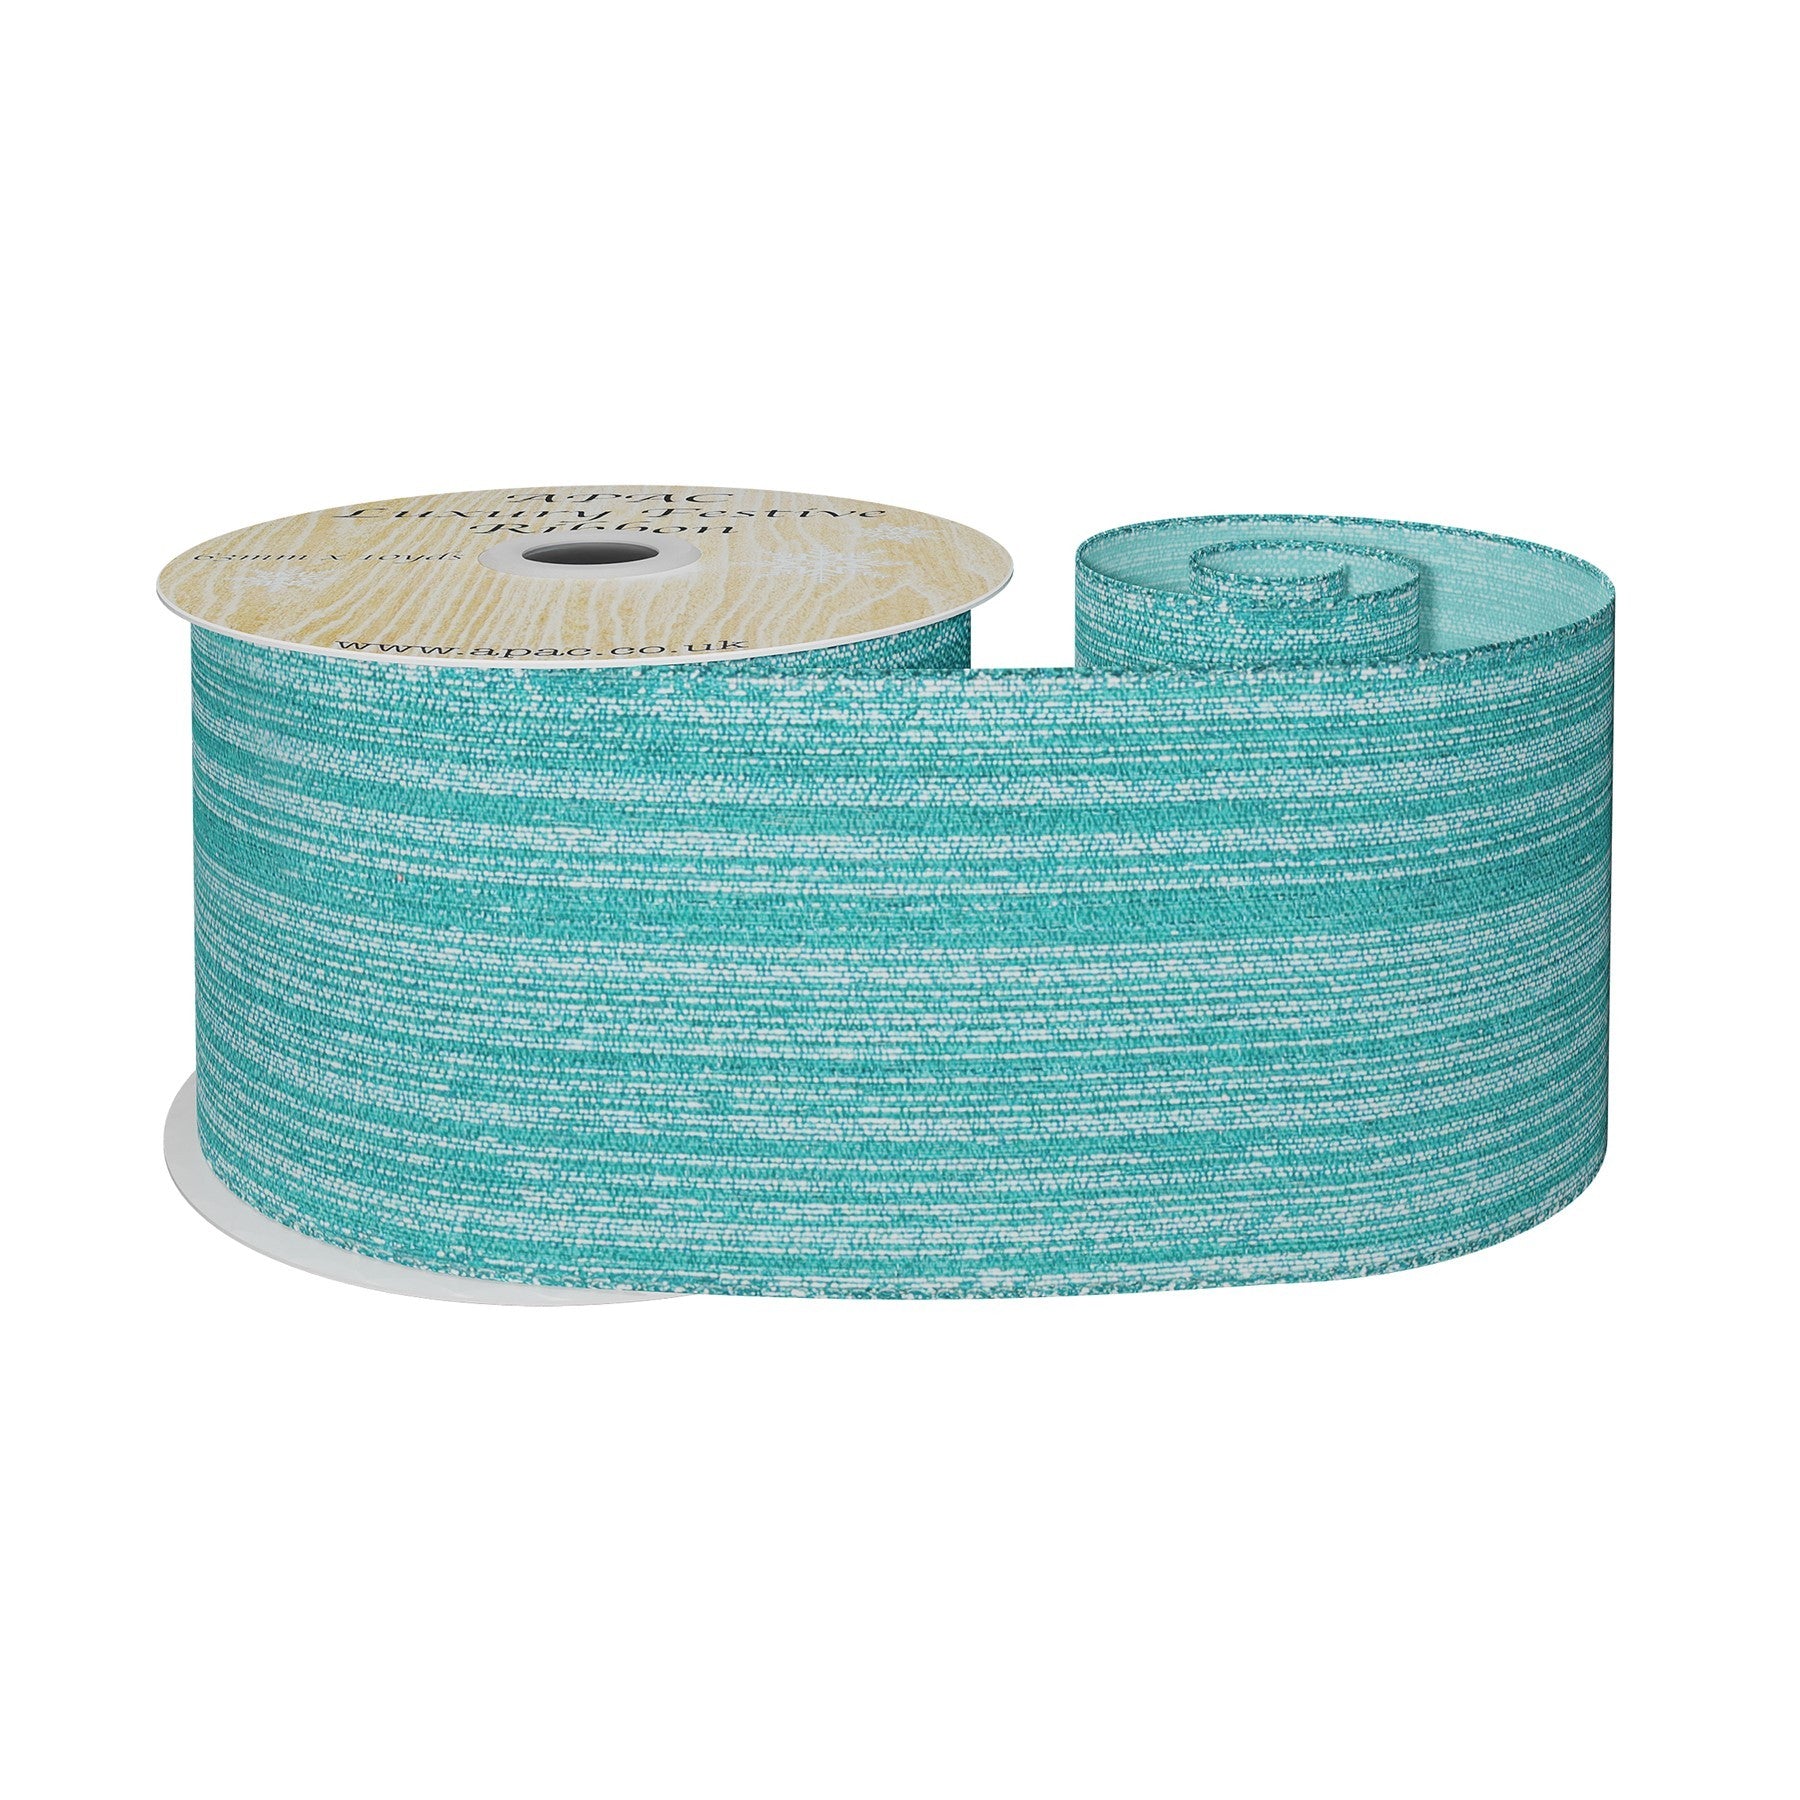 View Turquoise Shimmer Thread Ribbon 63mm x 10yds information